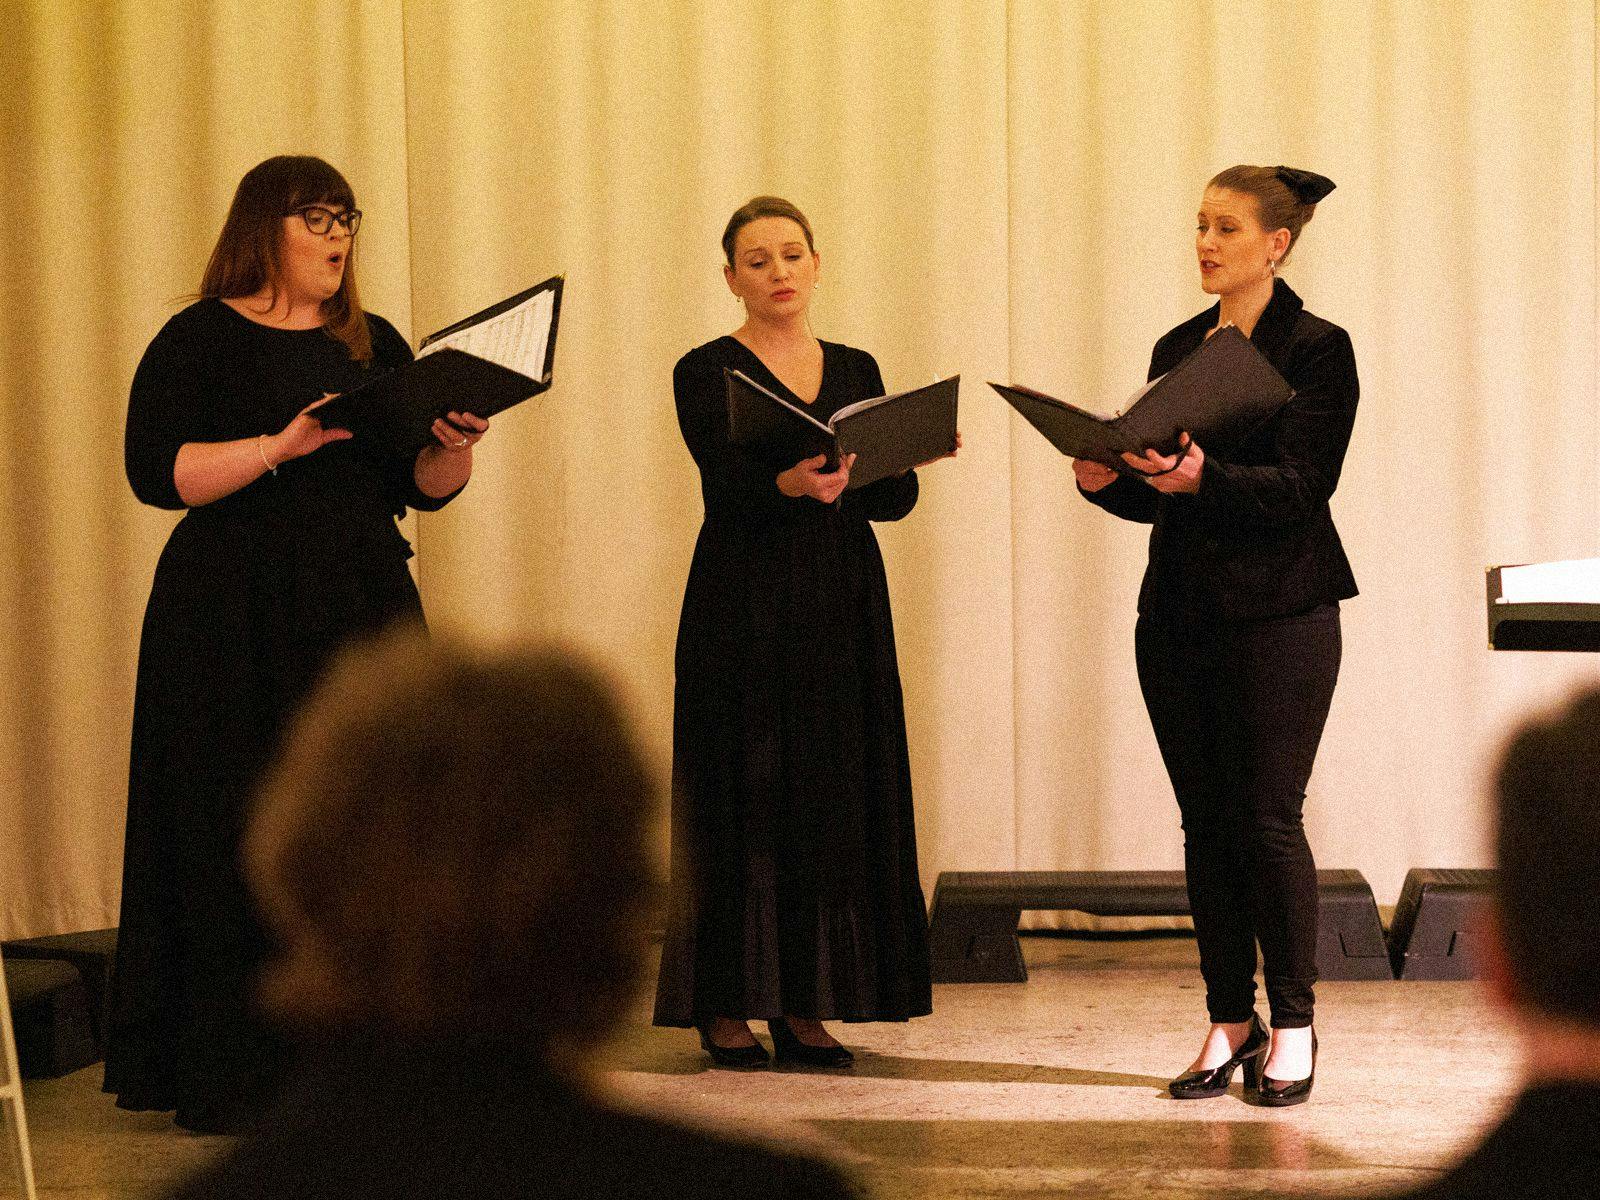 3 singers perform against a curtained background, dressed in fully black outfits they hold black folders of music notation.